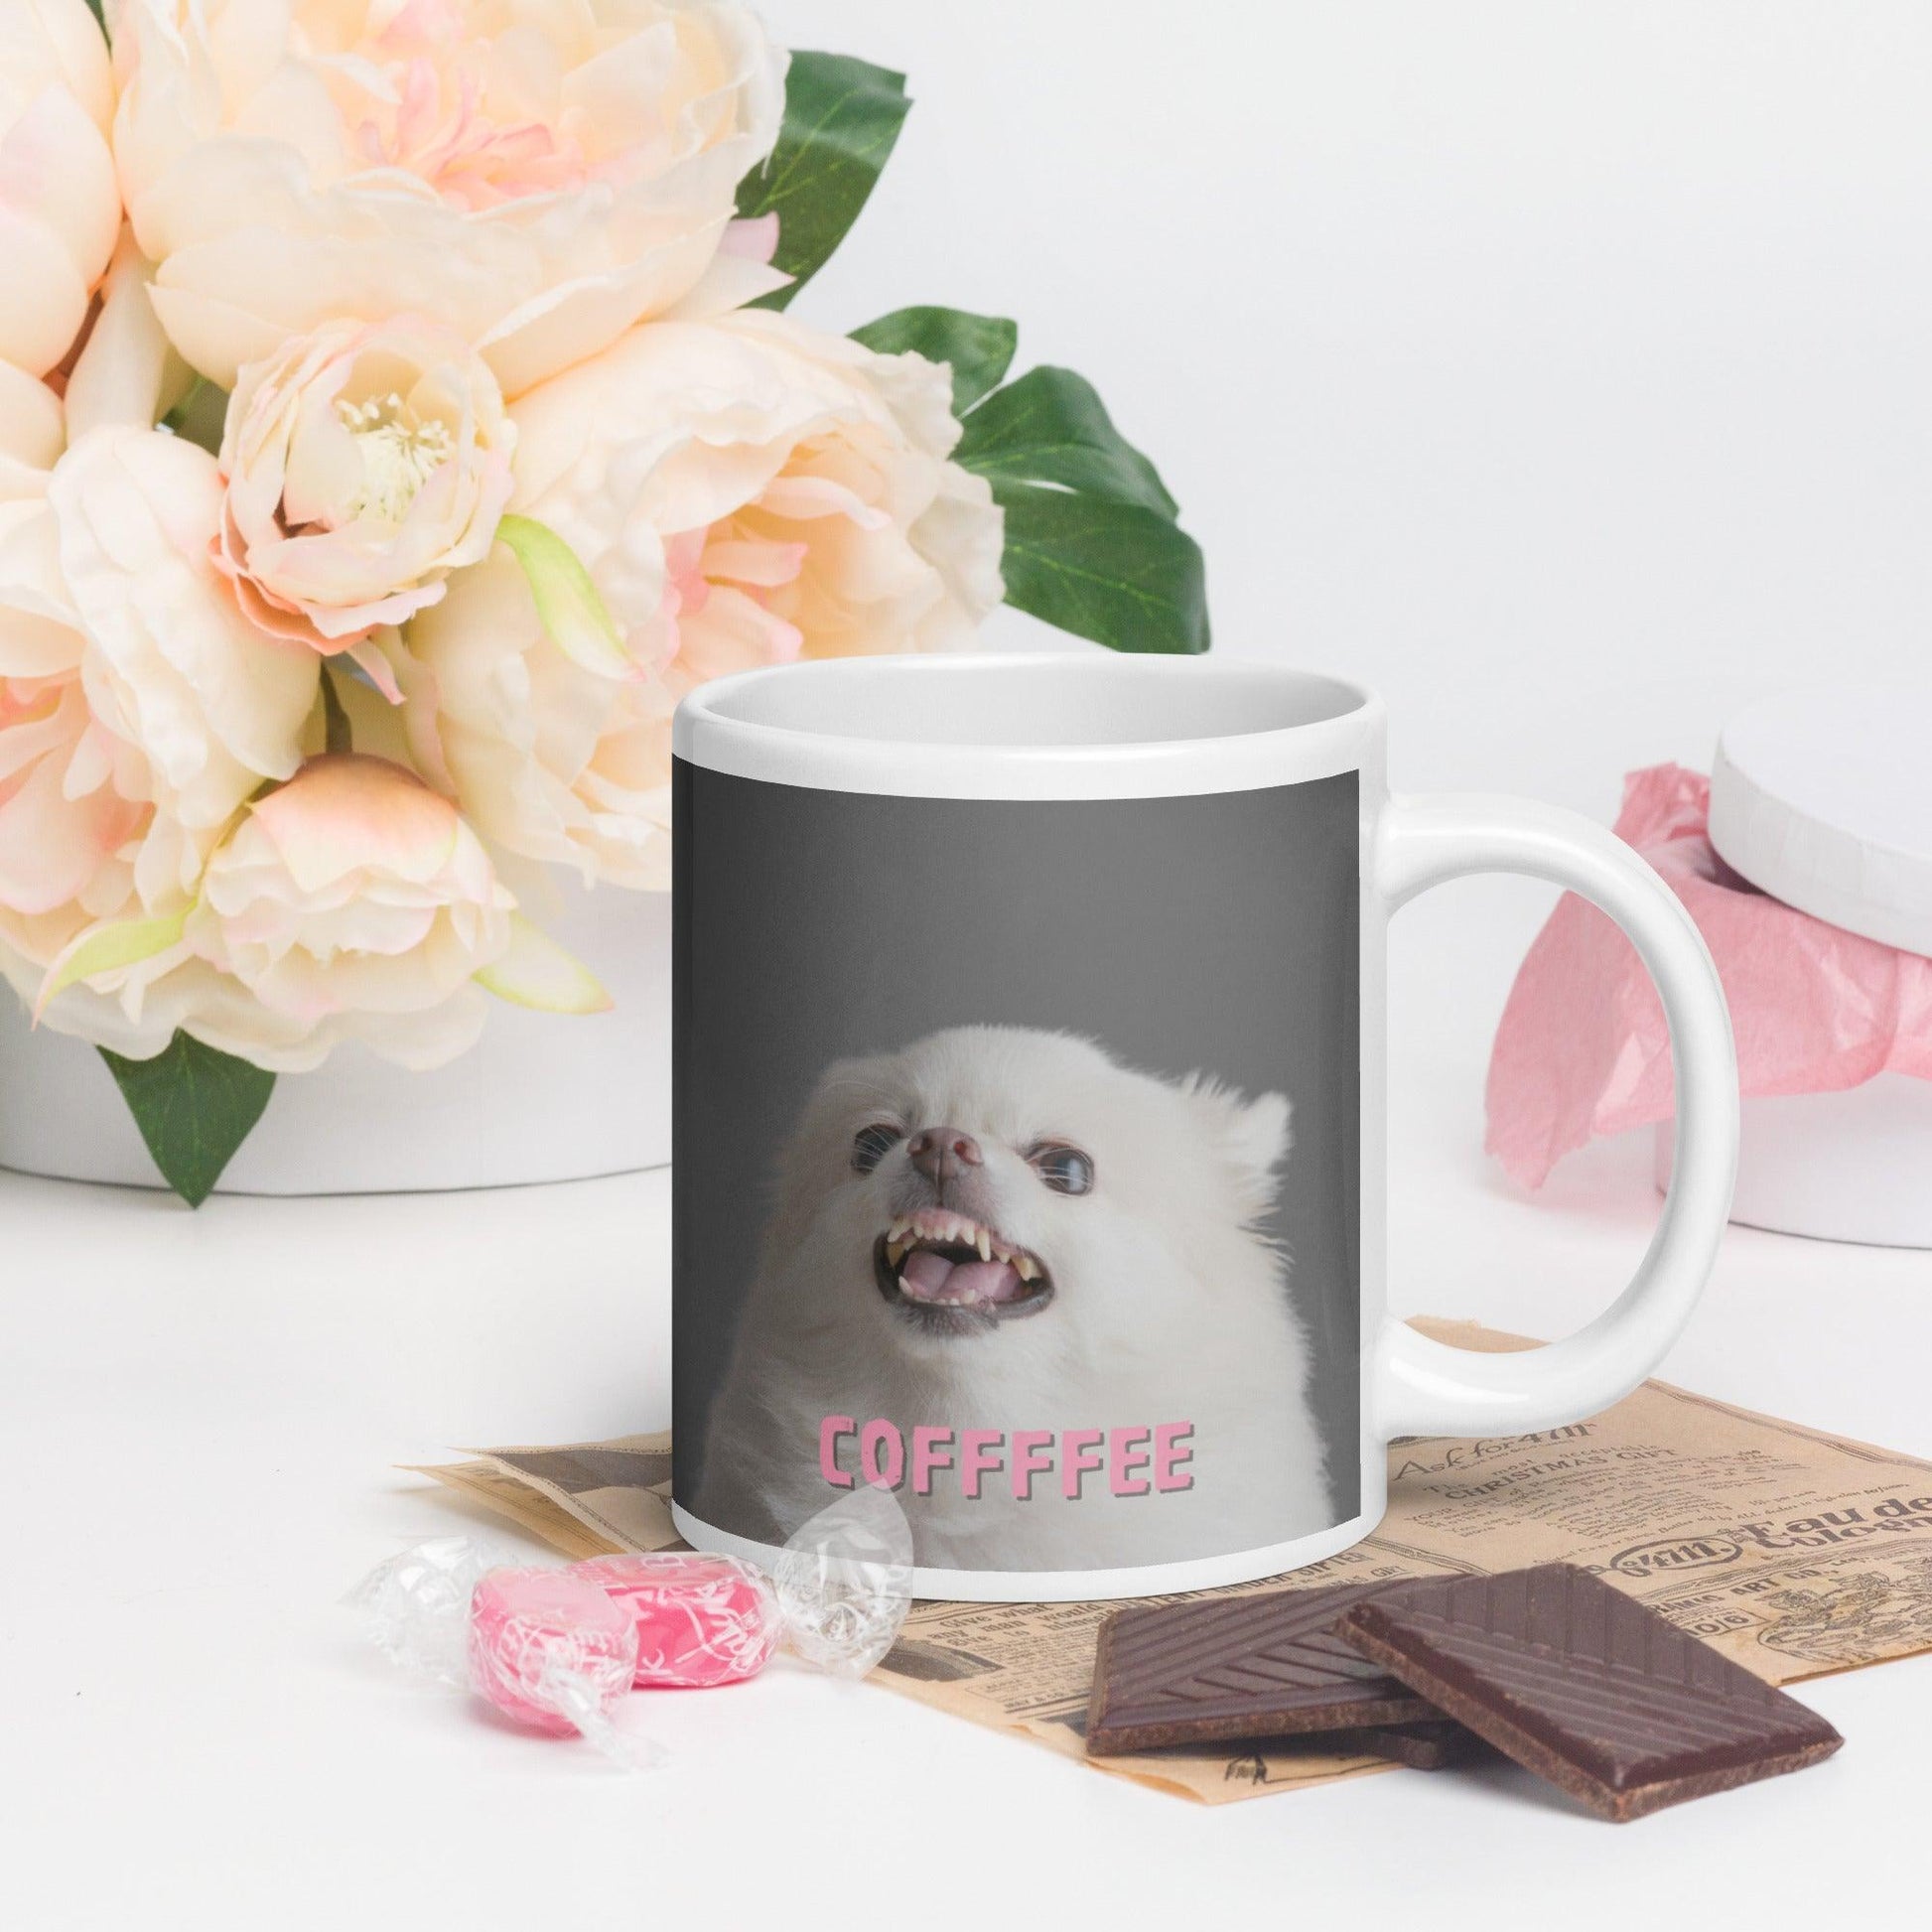 COFFFFEE - chihuahua meme coffee mug.  A cute and fluffy white chihuahua is feeling tetchy first thing in the morning and barking - snapping - their order for coffee. (Top of the morning to you too, coffee diva.) Best shut up and put the kettle on already! This adorable chihuahua meme mug makes a funny yet stylish gift idea for someone who loves chihuahuas and coffee. Or a warning to everyone that you're not a morning person.